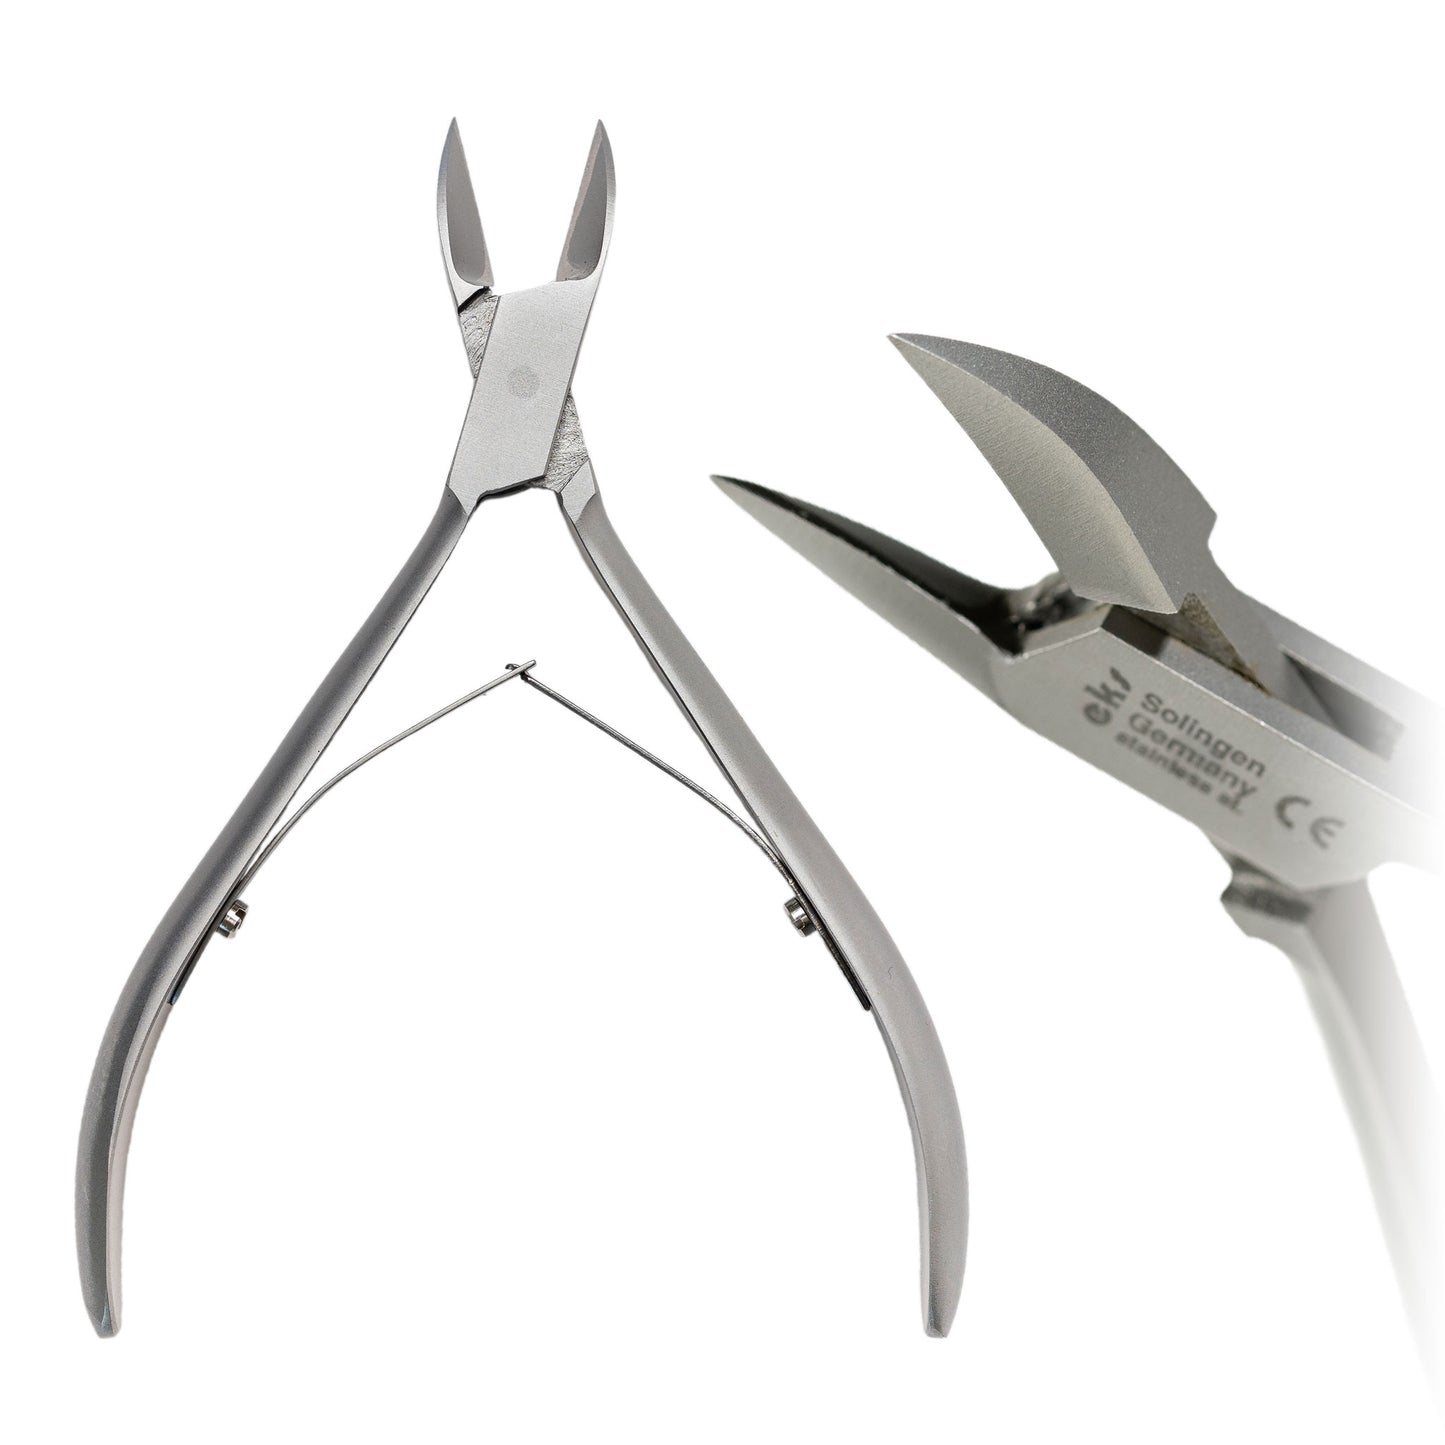 13 cm Podiatry Moderate Nail Nippers (17 mm Concave Cut) 7-30RD